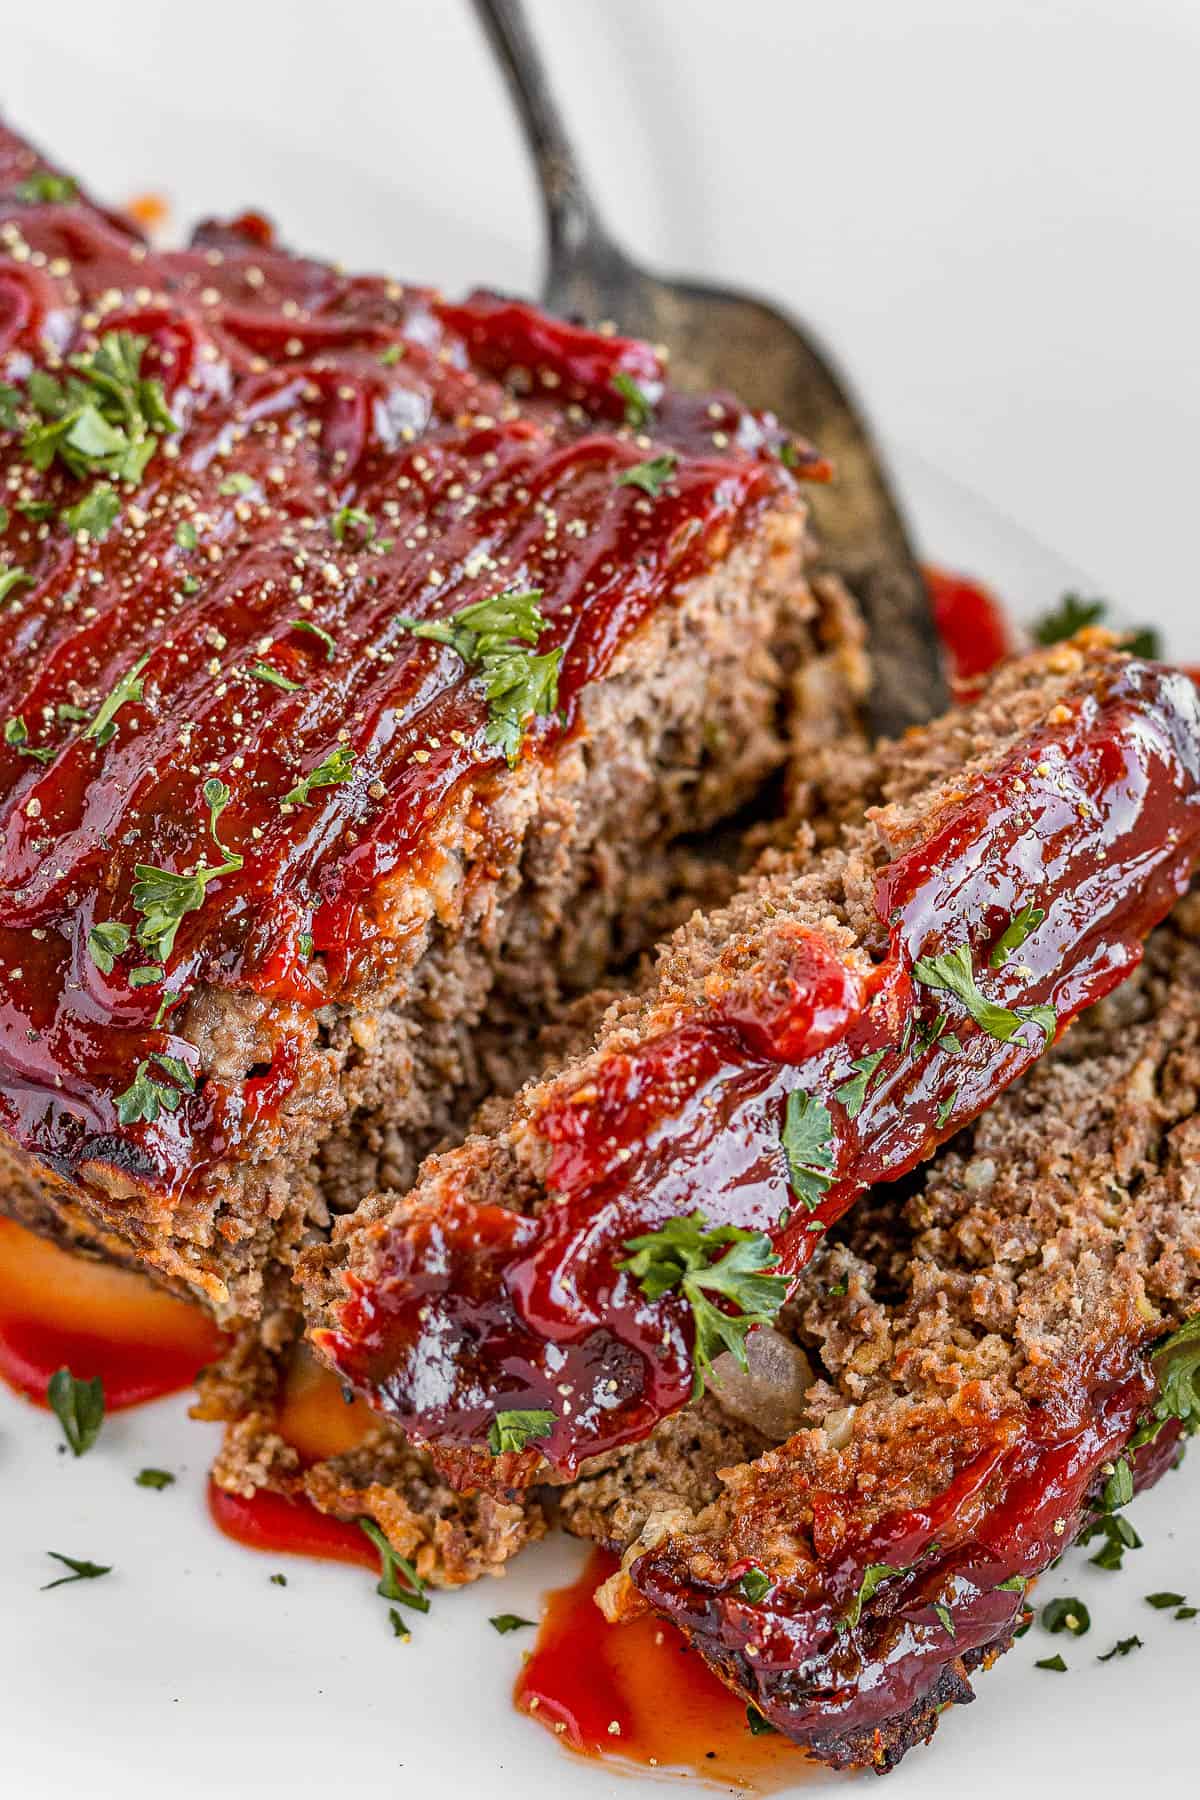 Meatloaf Covered in Barbecue Sauce on a White Serving Platter